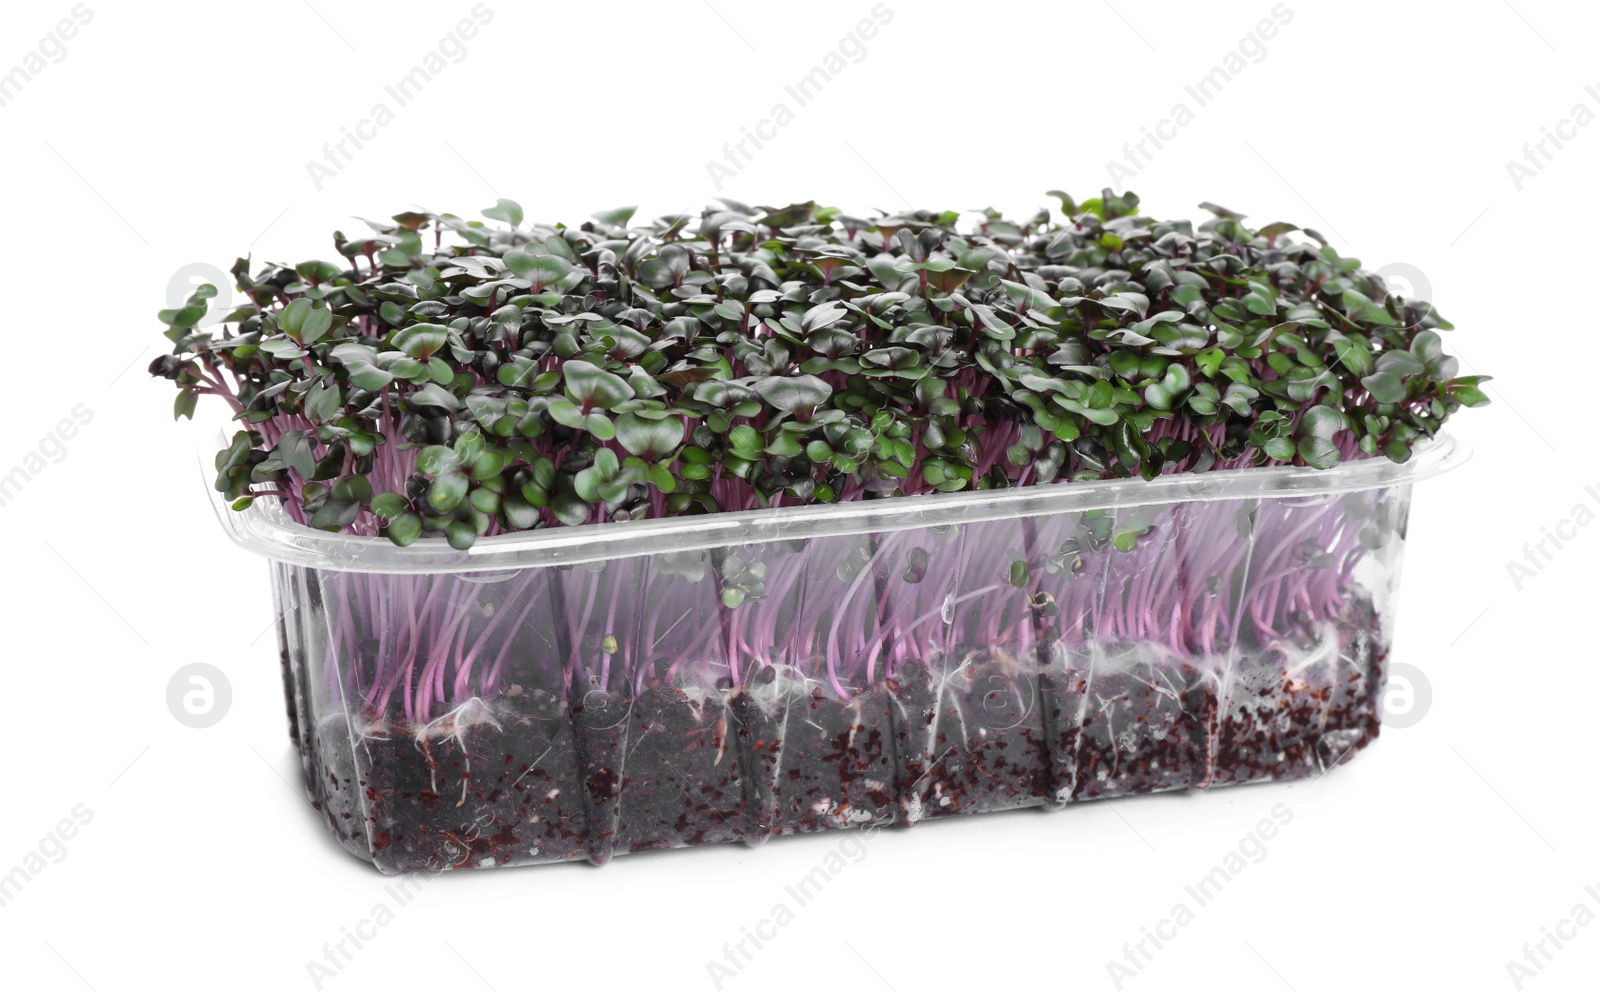 Photo of Fresh organic microgreen in plastic container on white background